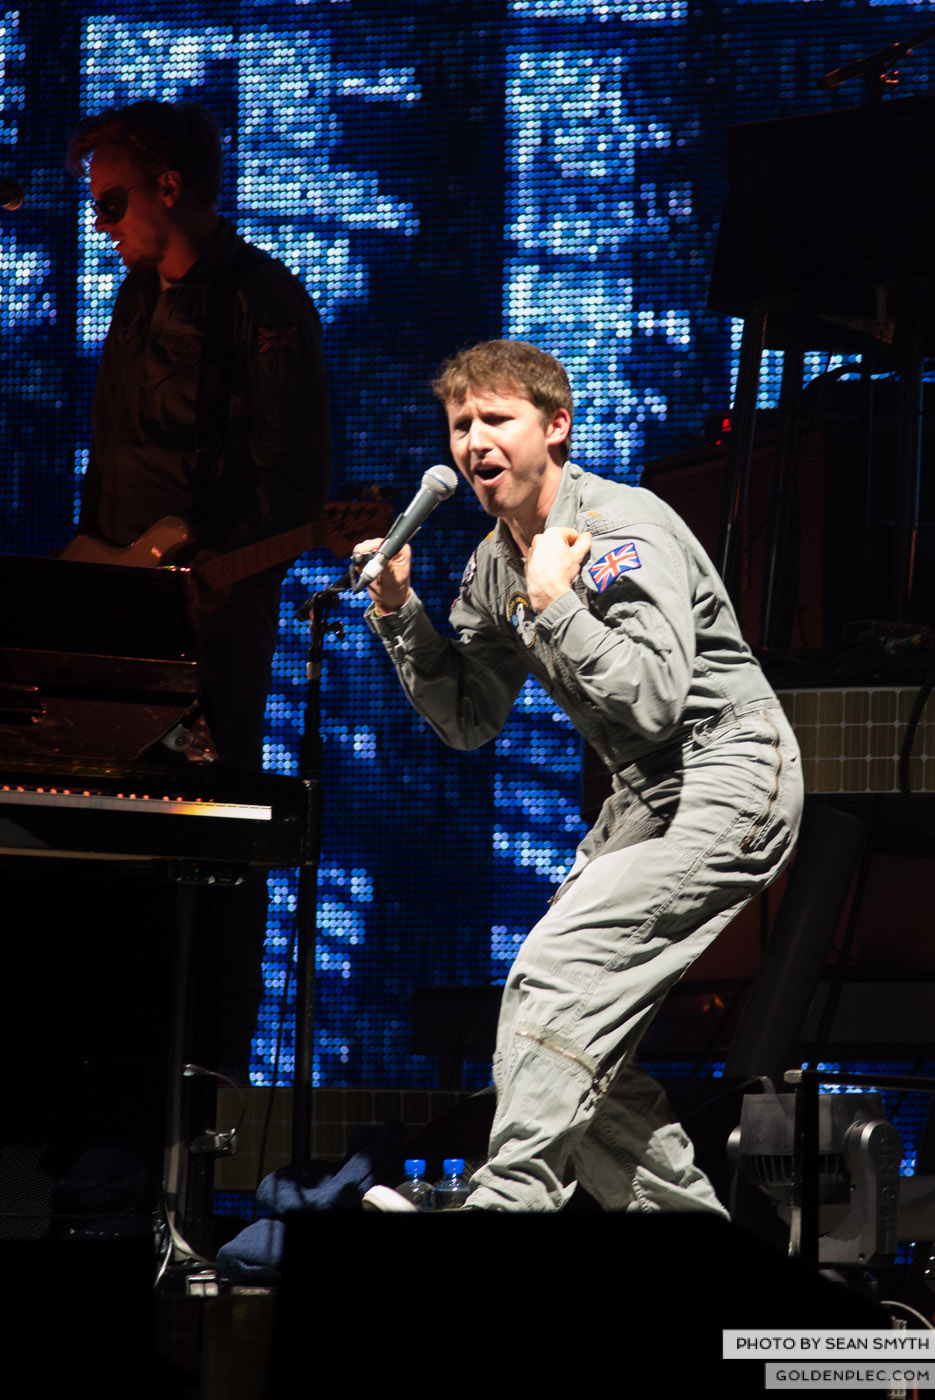 james-blunt-at-3arena-by-sean-smyth-20-11-14-12-of-29